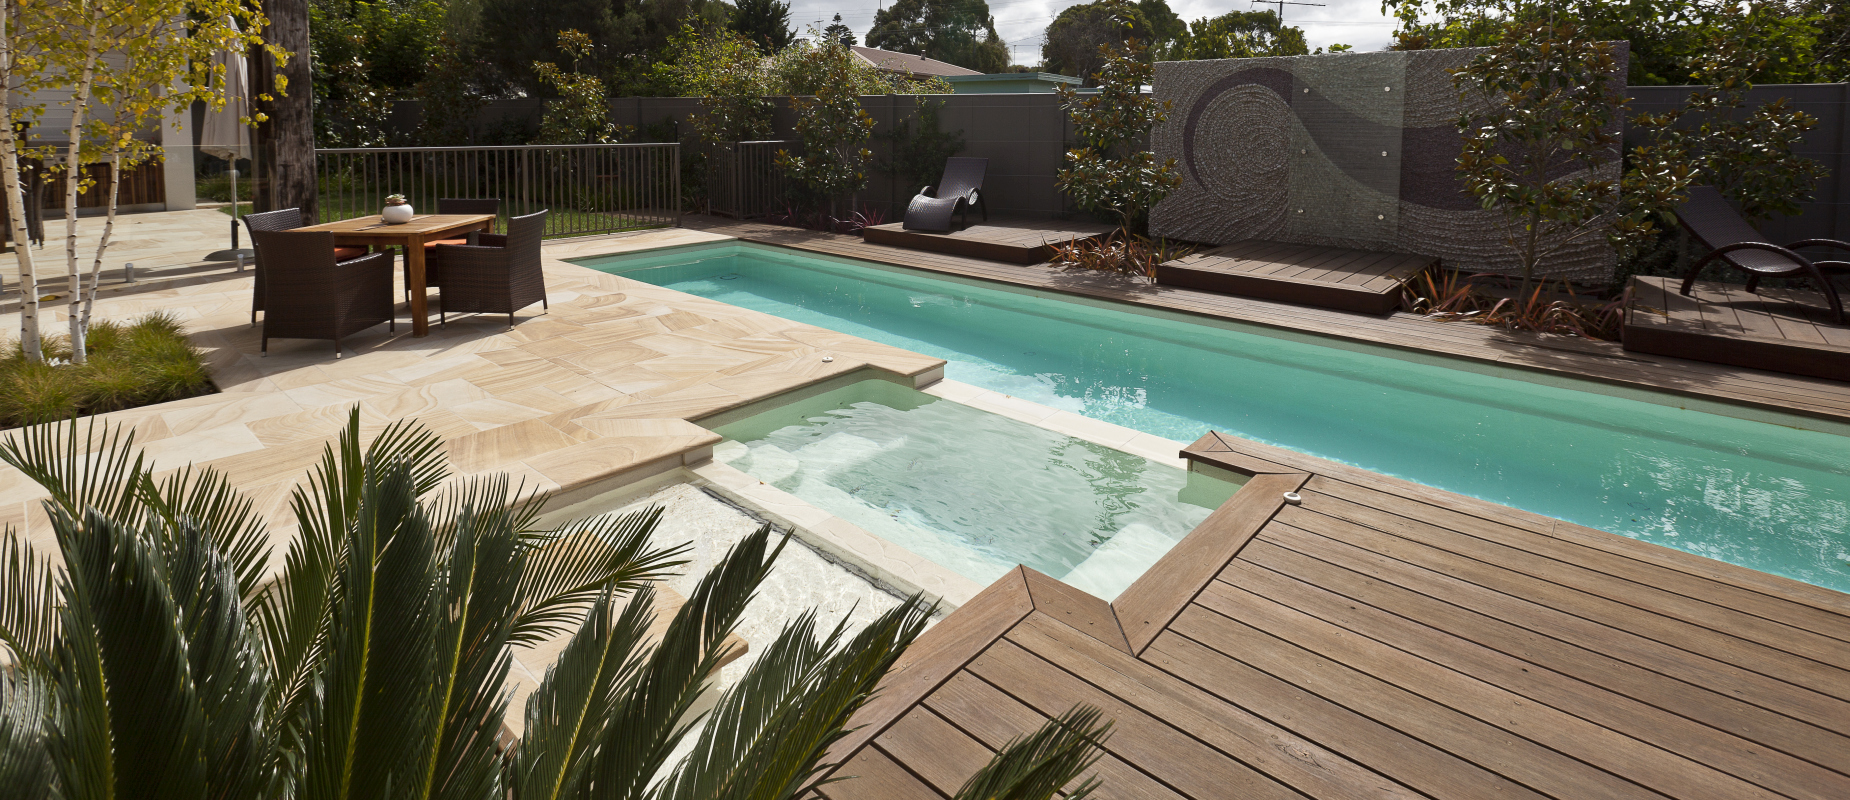 Compass-Pools-Australia_Fastlane-lap-pool-and-spa-combo-with-timber-decking